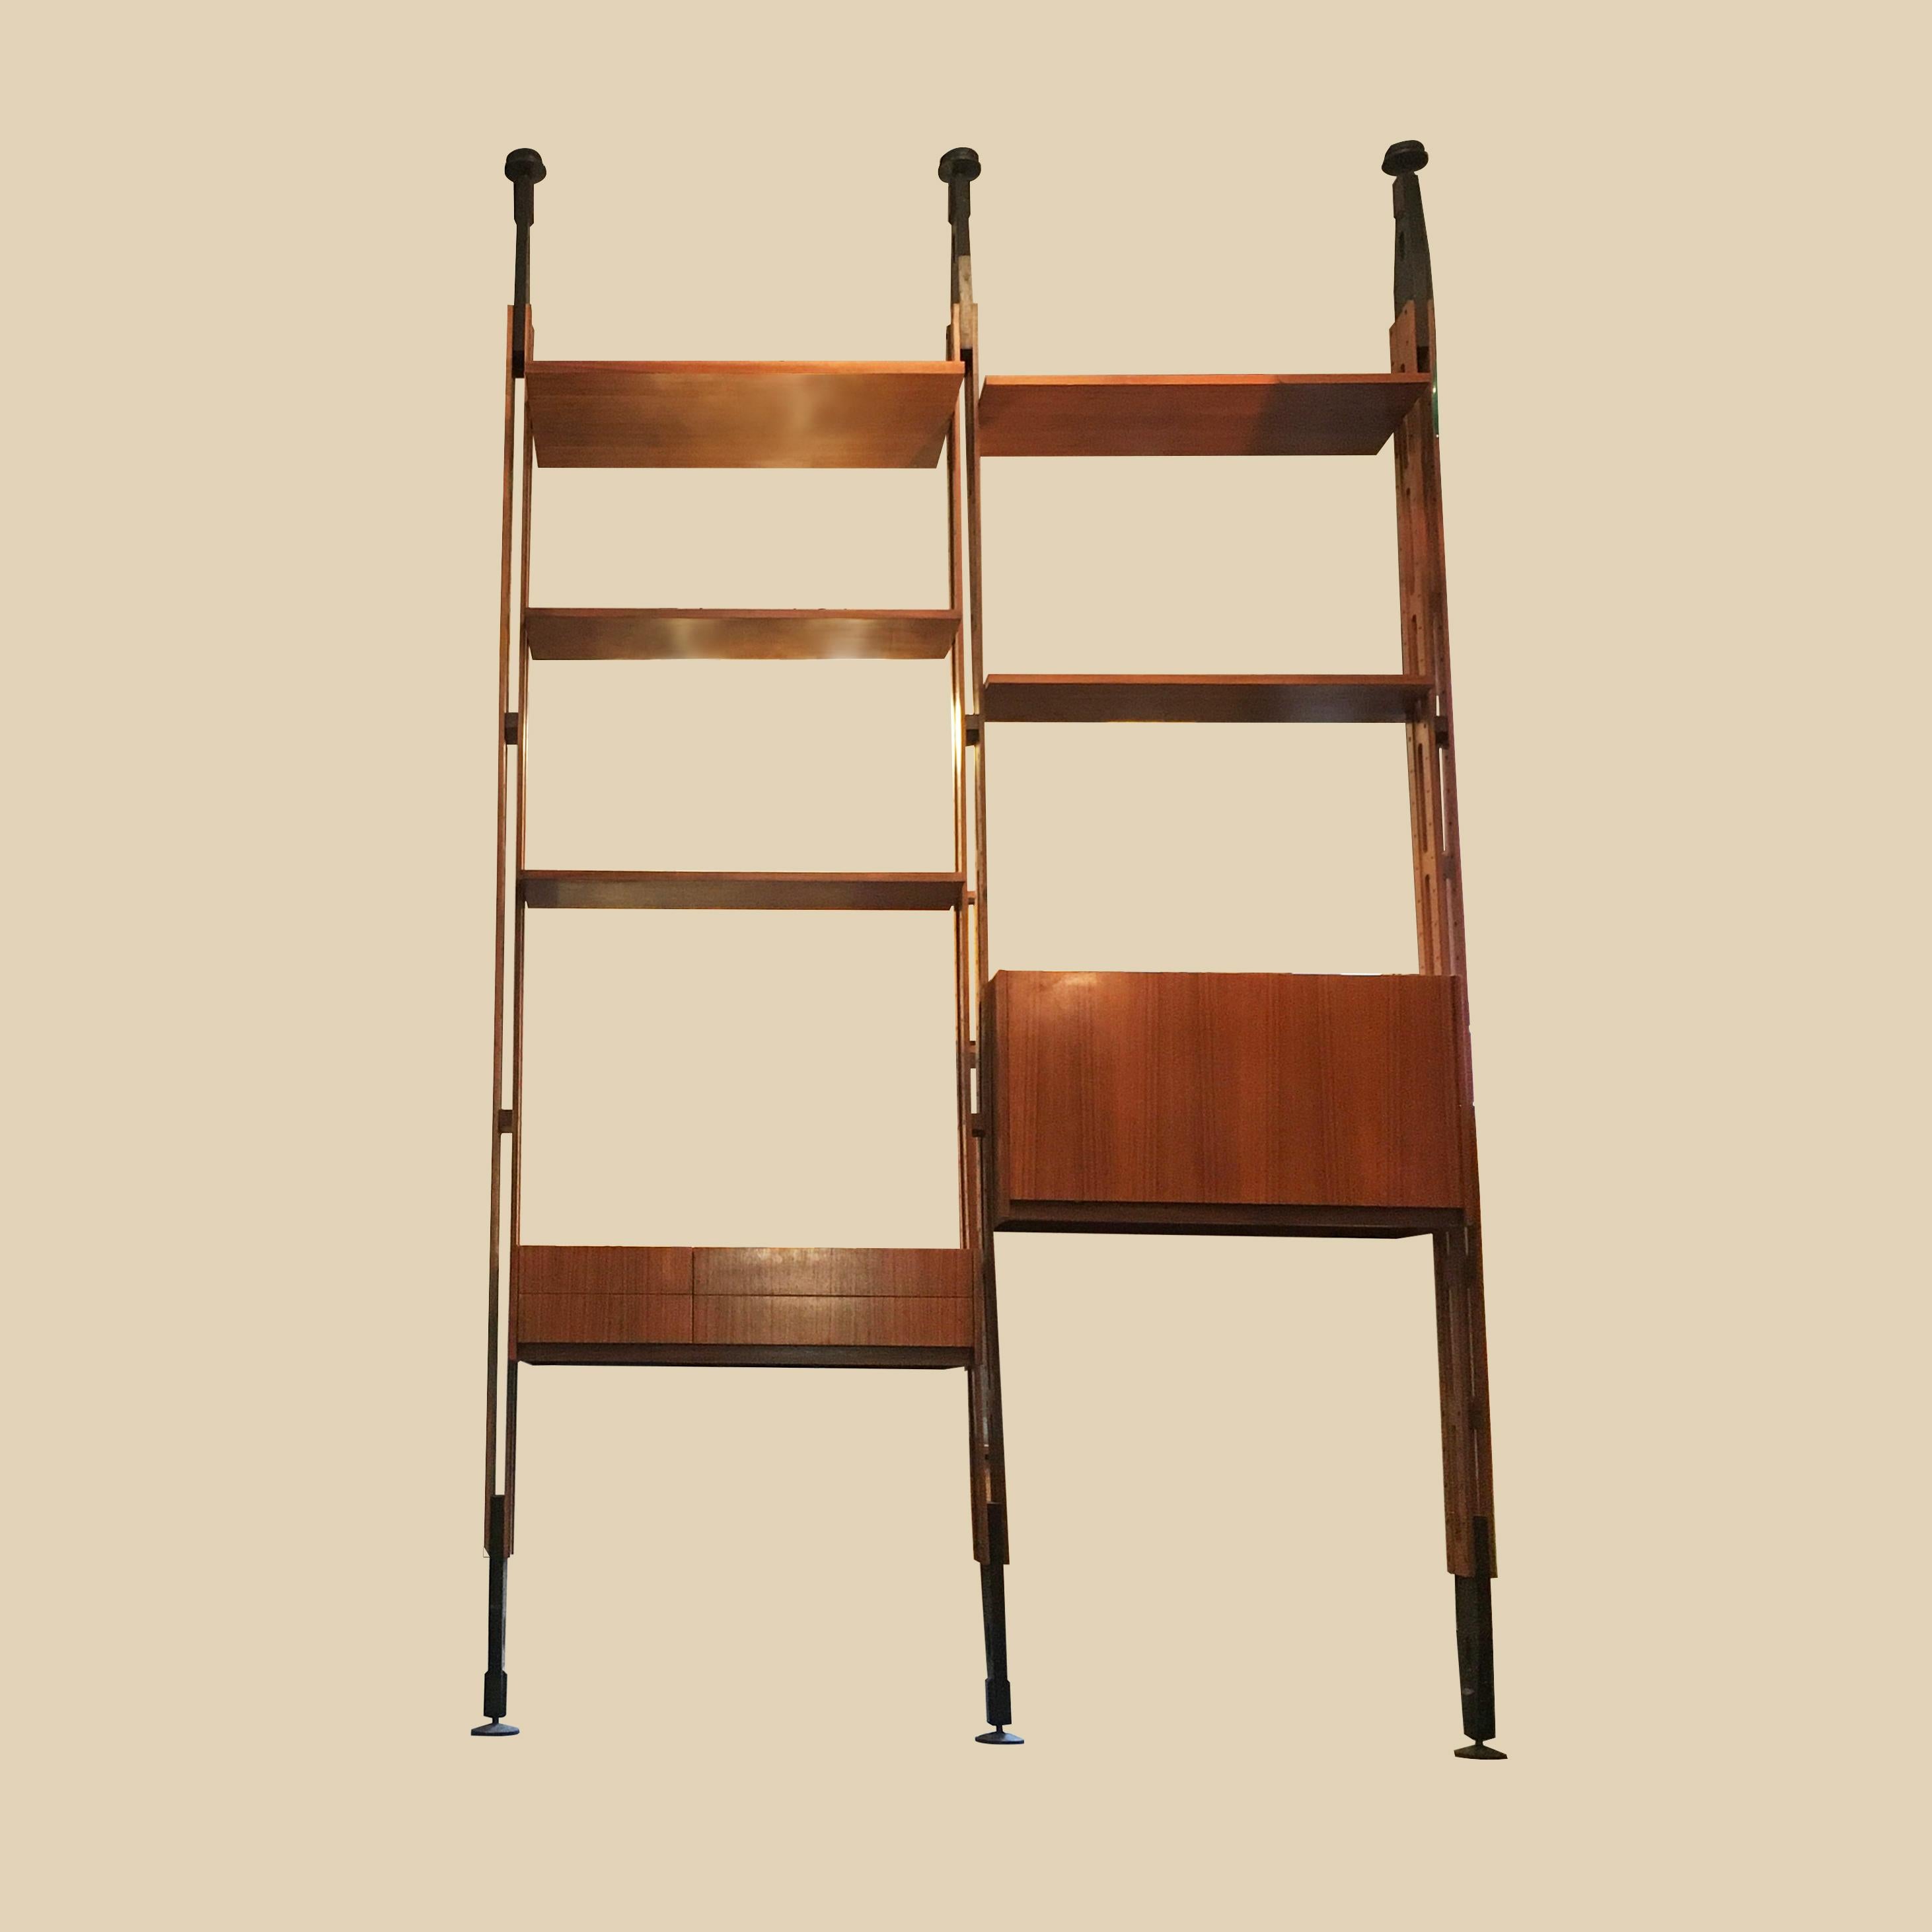 Giraffa bookcase created in the 1962 by Paolo Tilche for Arform. Wooden uprights, black painted wood terminals, adjustable black plastic terminals. 5 shelves and a container with flap door in veneered wood and a written module with 4 asymmetrical